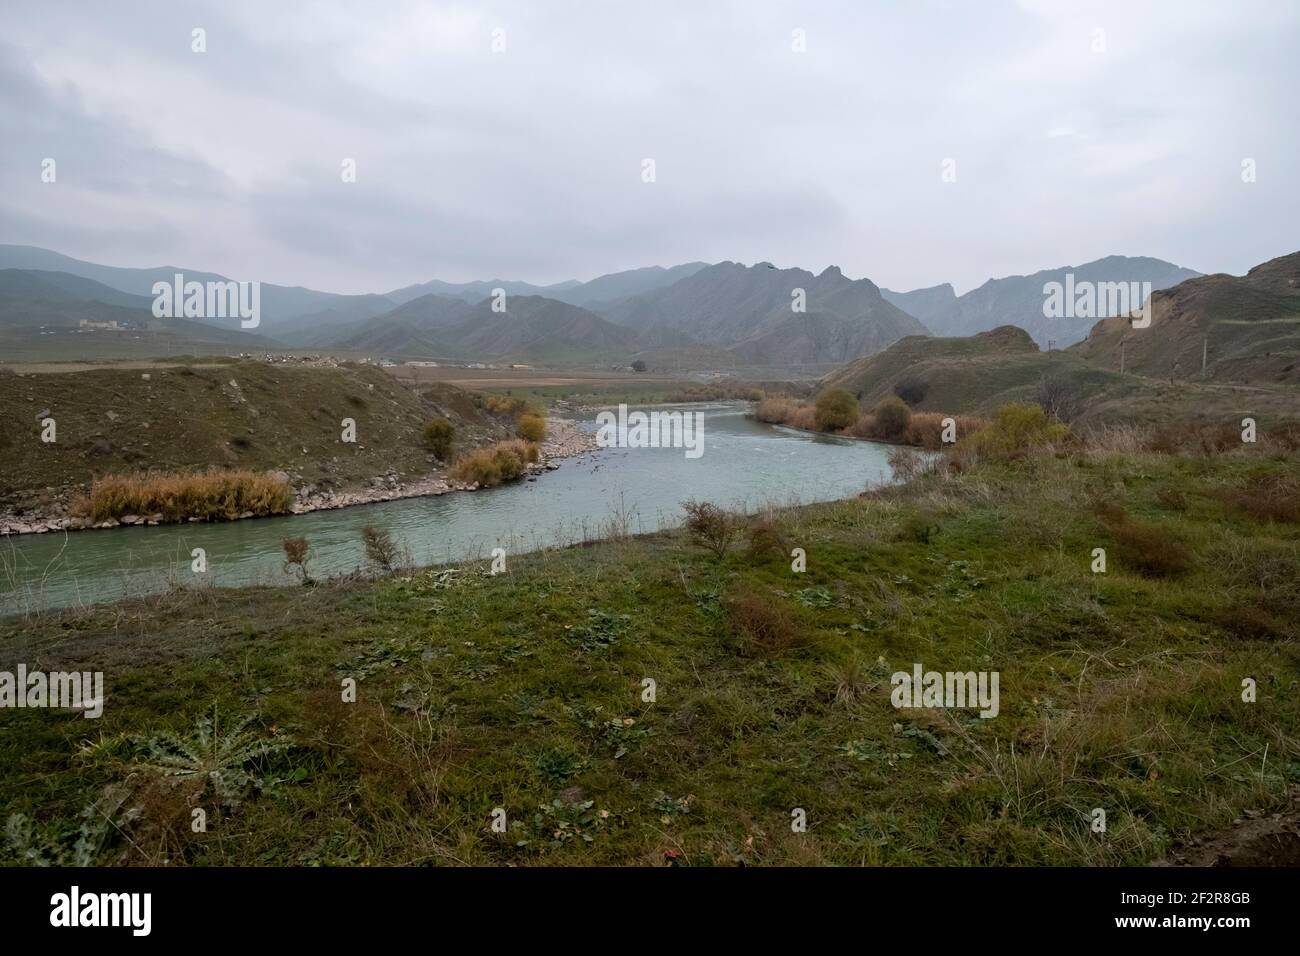 JABRAYIL, AZERBAIJAN - DECEMBER 15: View of the Aras or Araxes or Araks river which flows along the border between Azerbaijan and Iran on December 15, 2020. Aras river borders territory which was controlled by ethnic Armenian authorities in Azerbaijan adjacent to Nagorno-Karabakh and was returned to Azerbaijani control as part of an agreement that ended the 2020 Nagorno-Karabakh War. Stock Photo